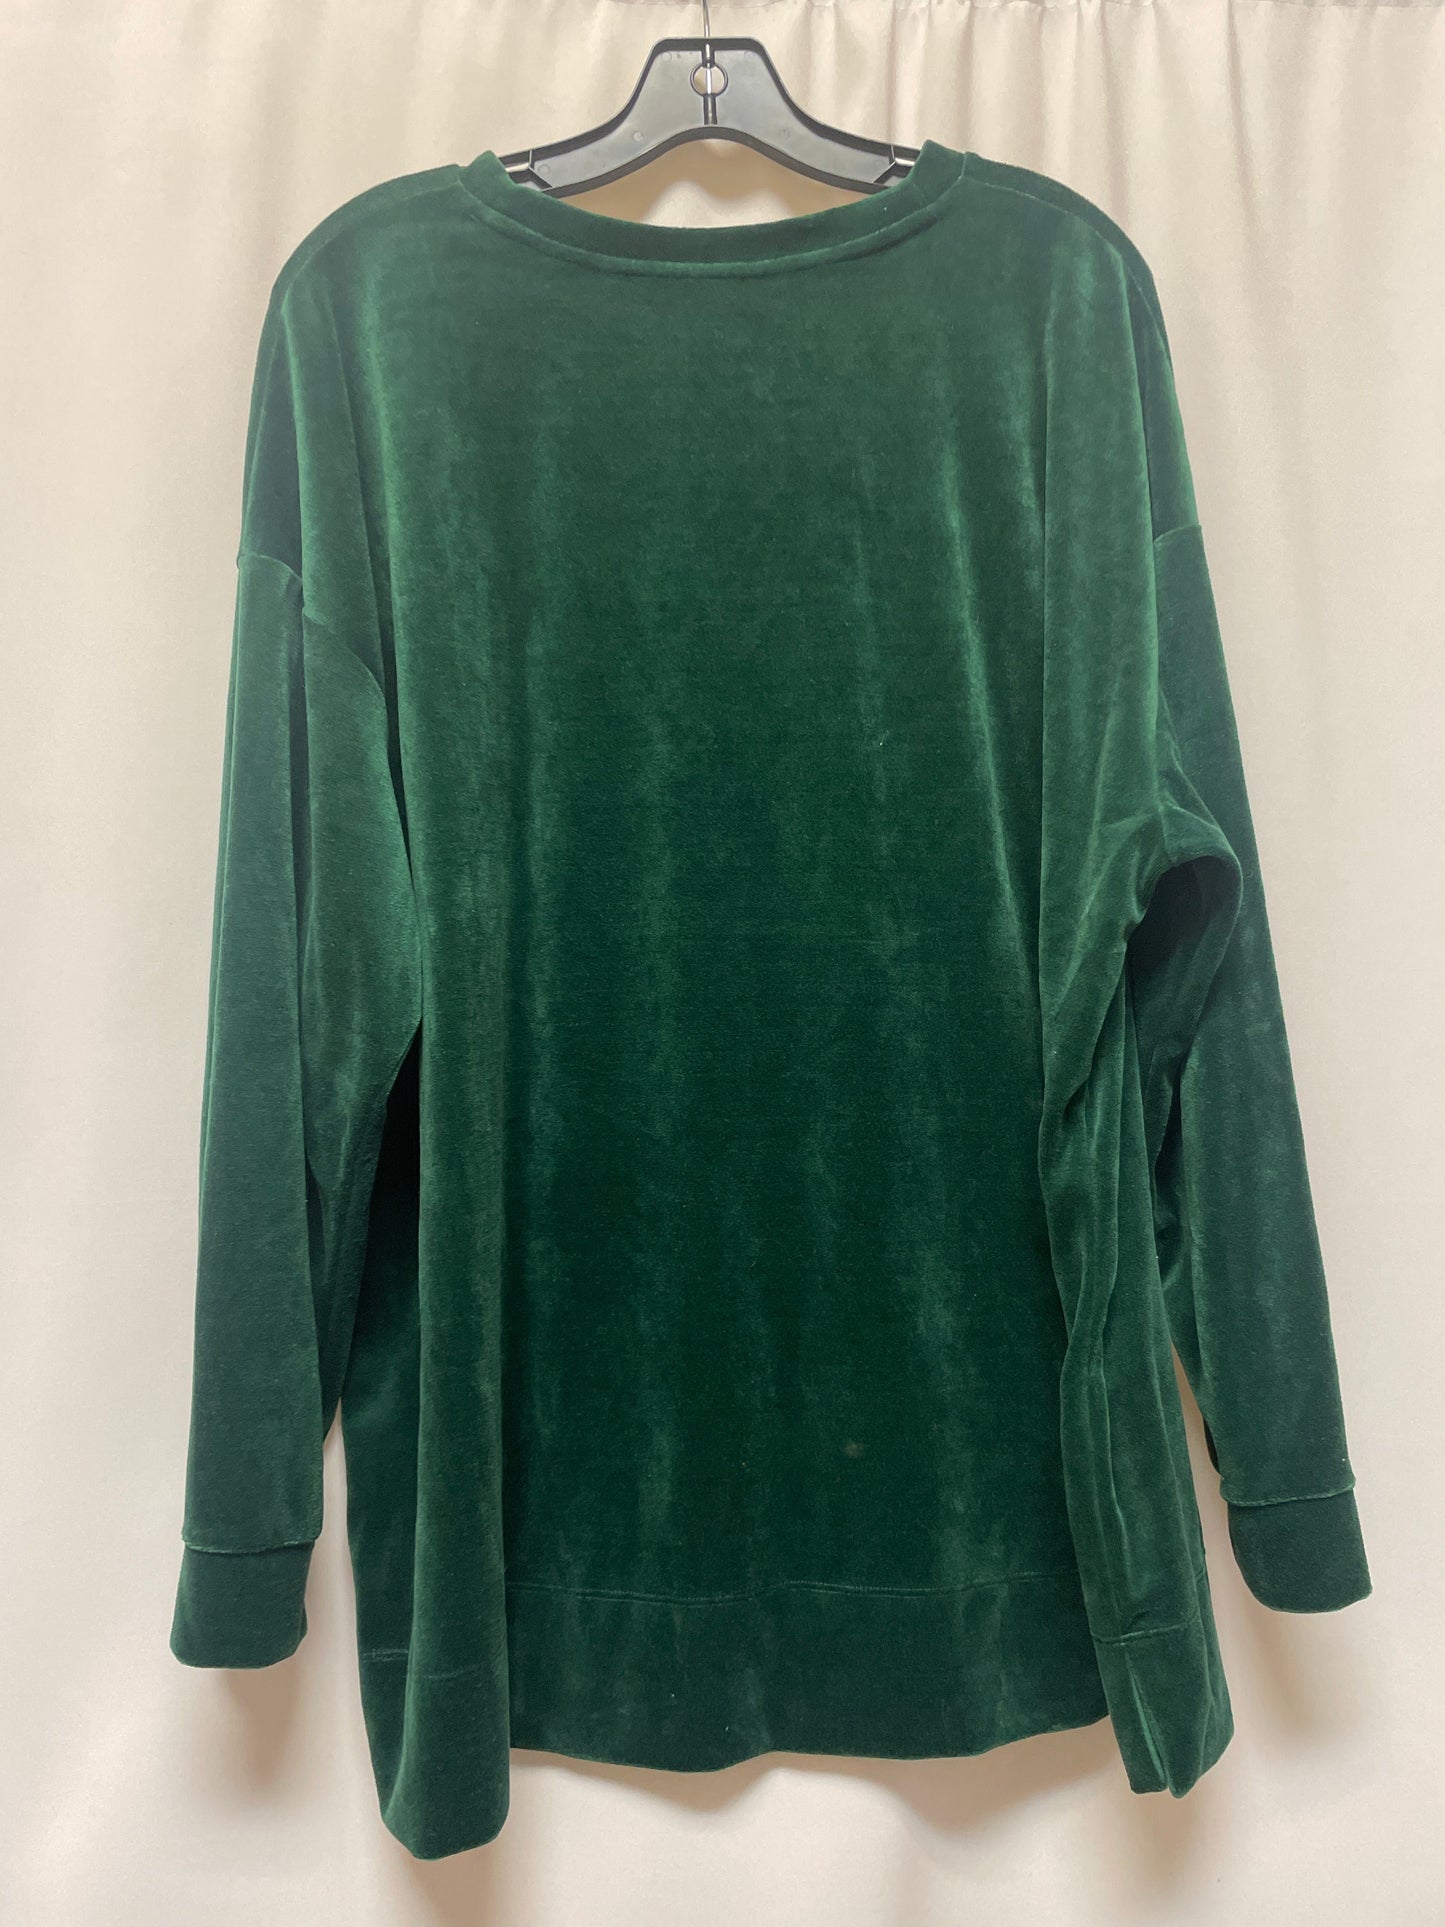 Green Top Long Sleeve Woman Within, Size 1x